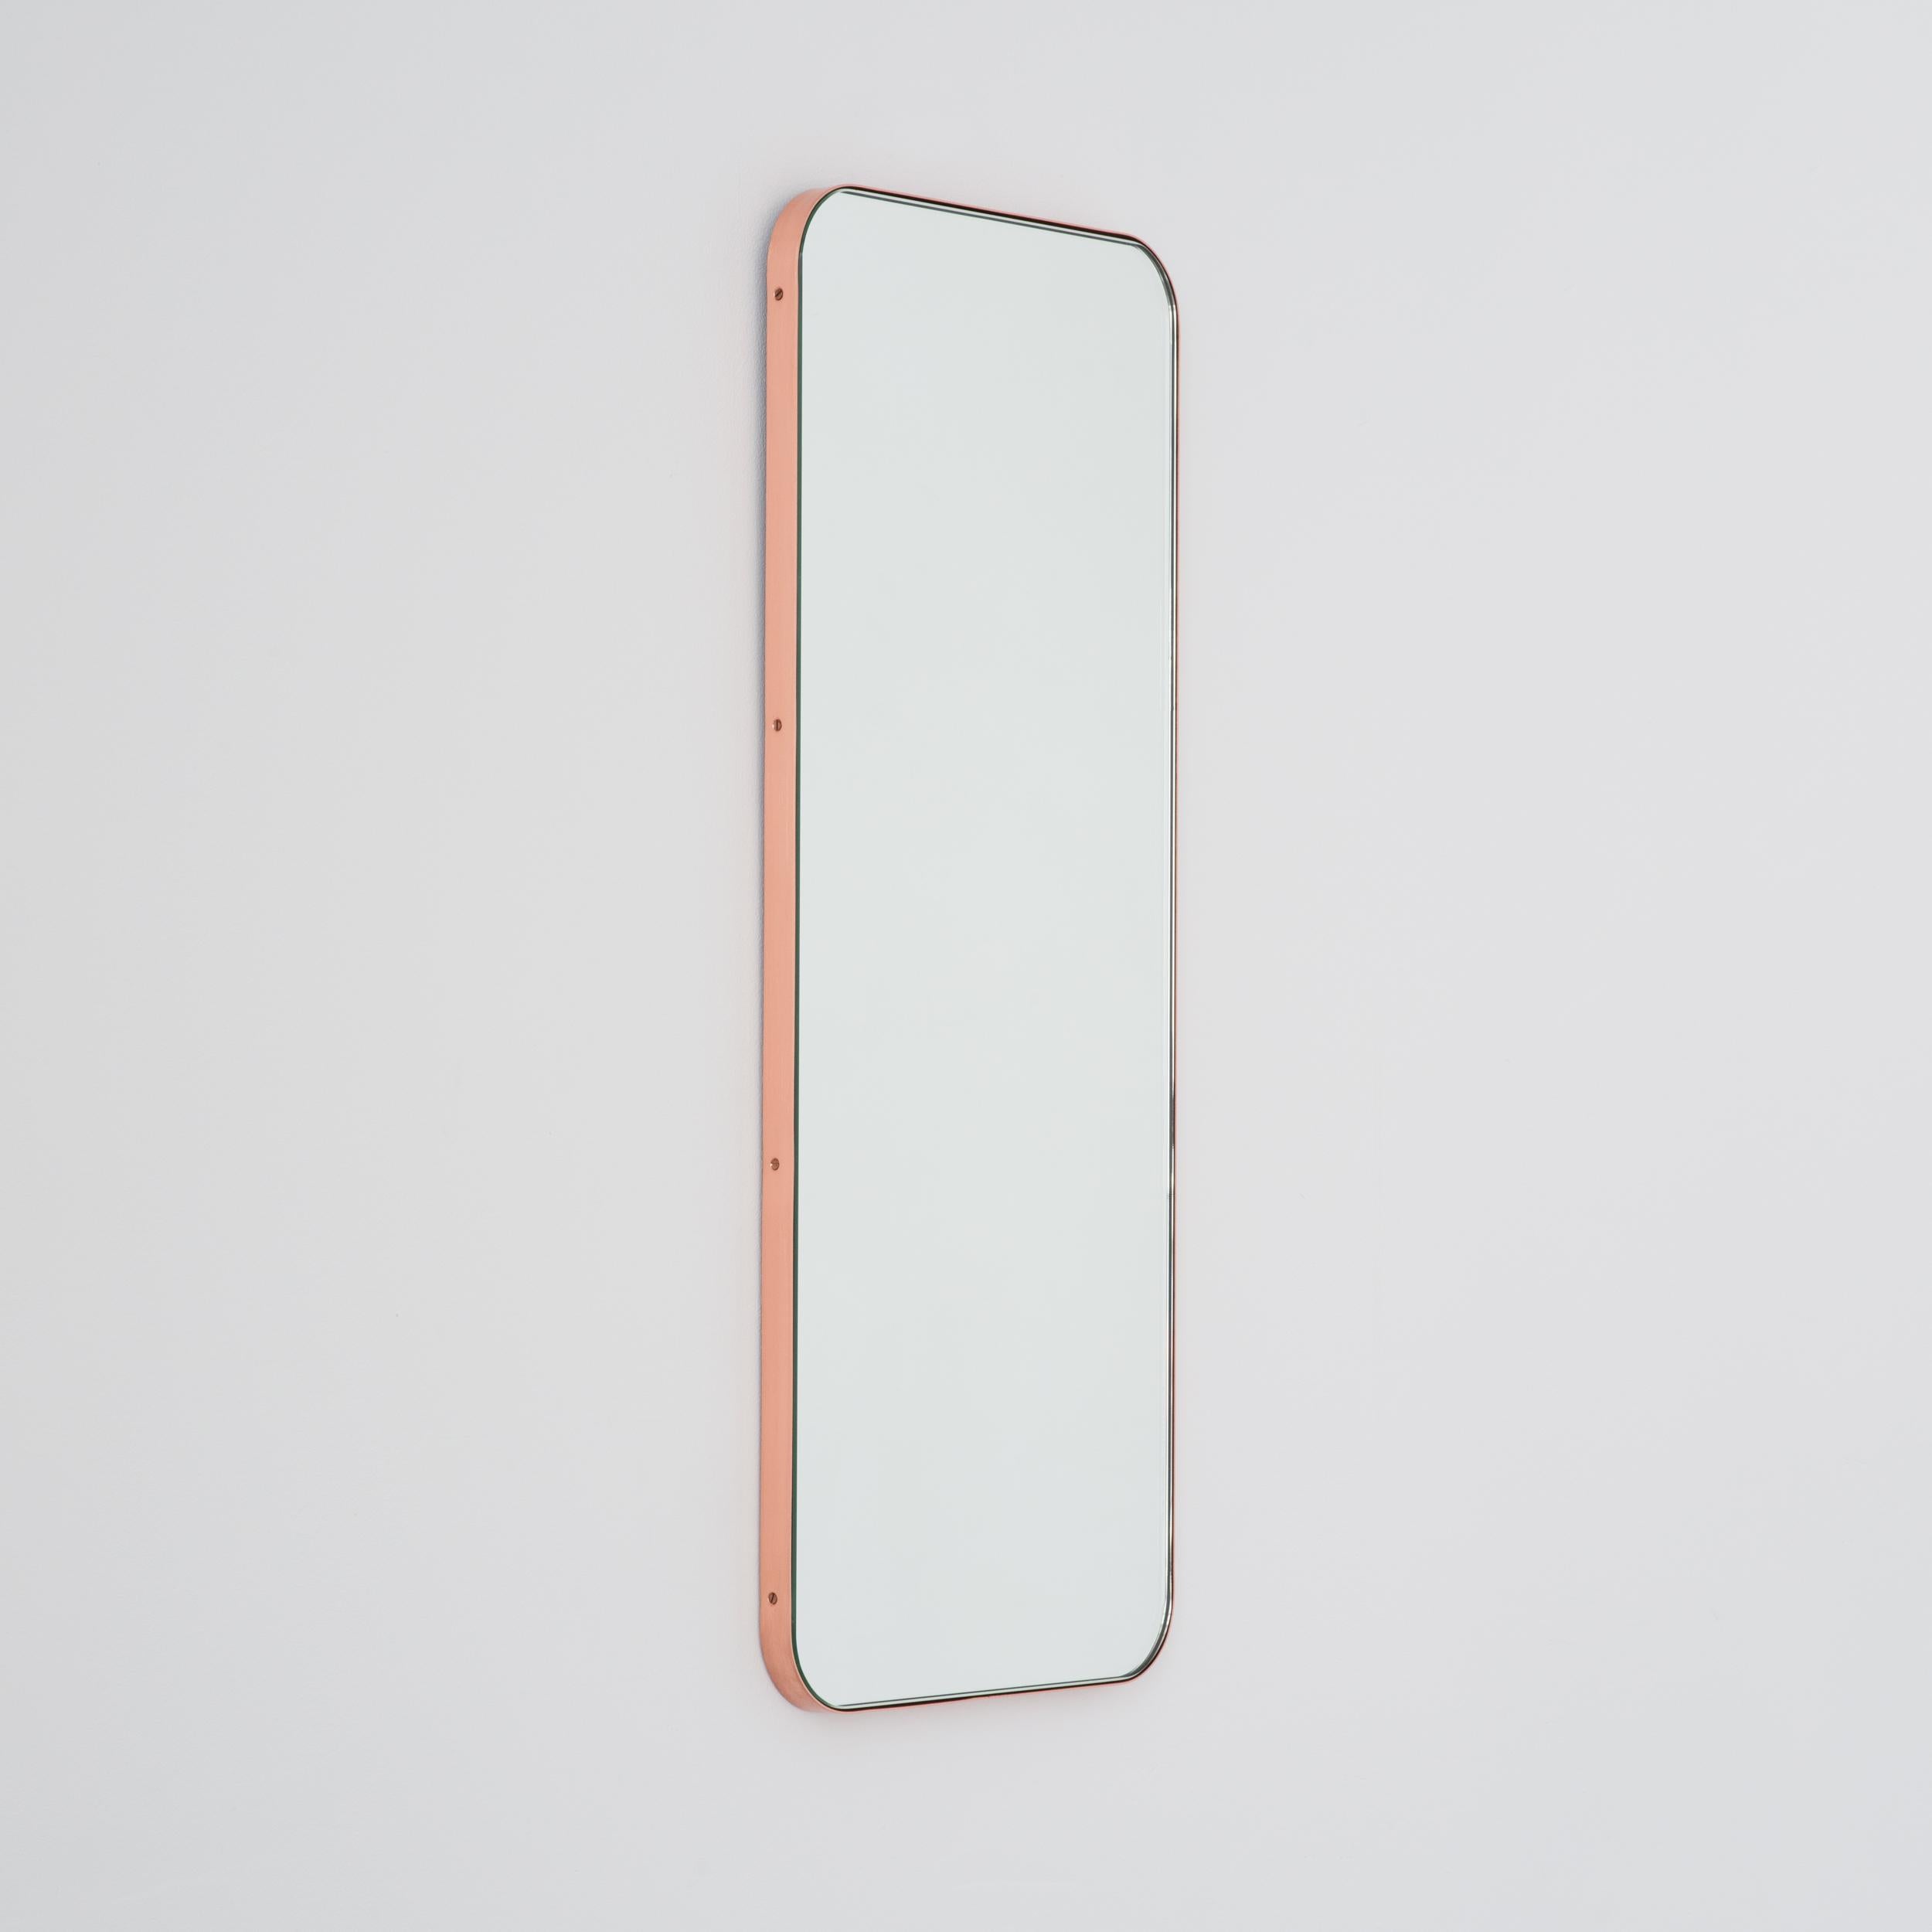 British Quadris Rectangular Contemporary Mirror with a Copper Frame, Large For Sale